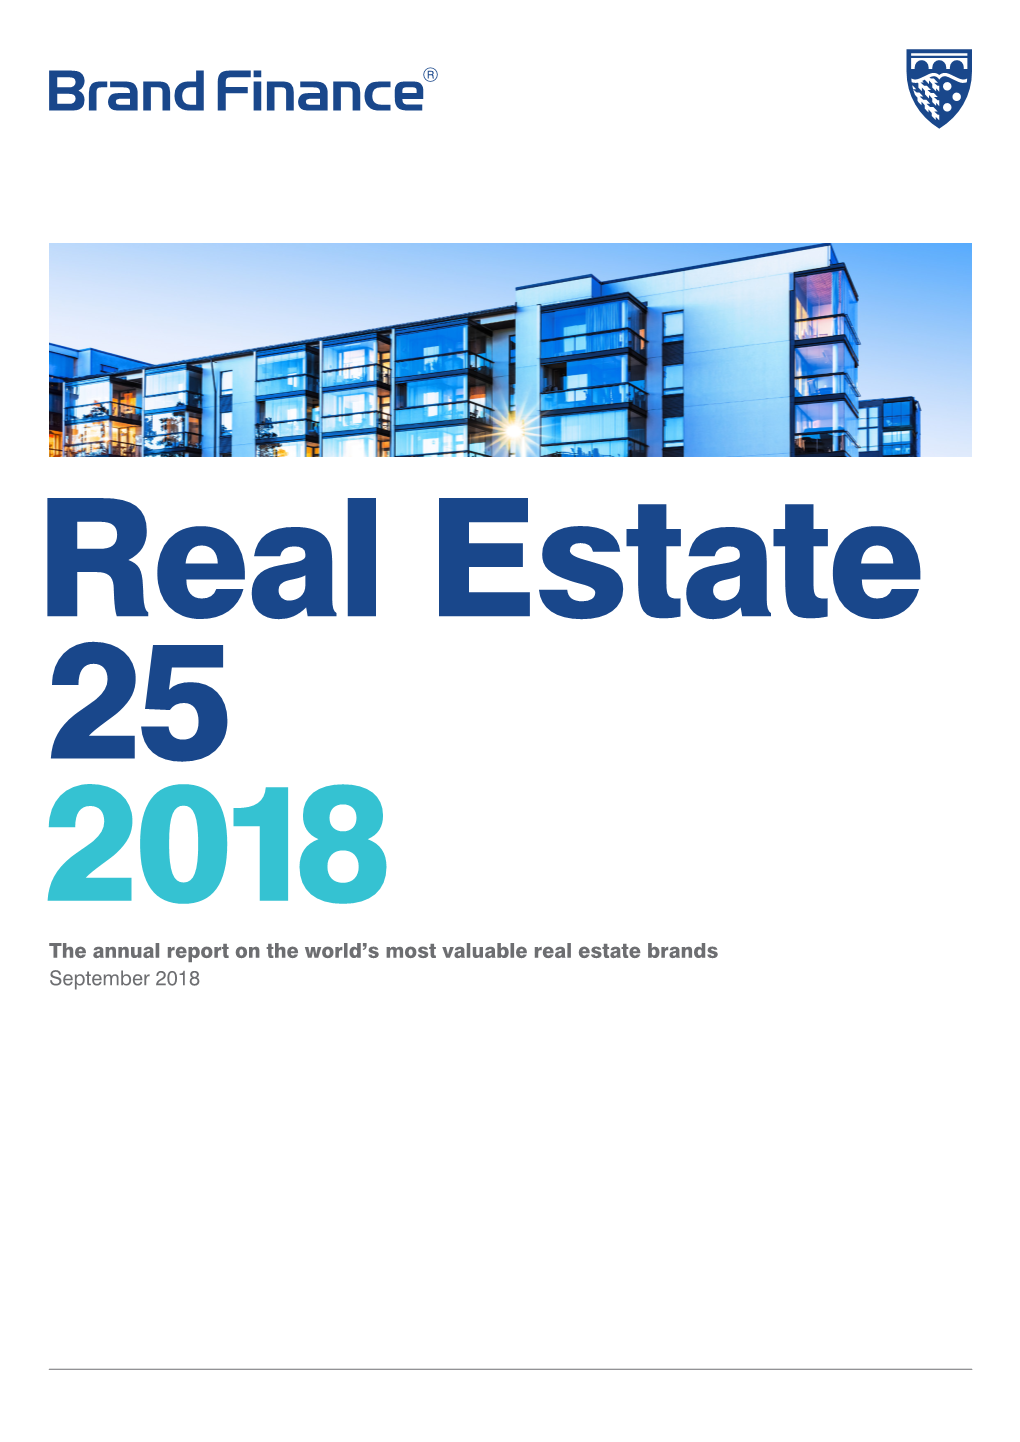 The Annual Report on the World's Most Valuable Real Estate Brands September 2018